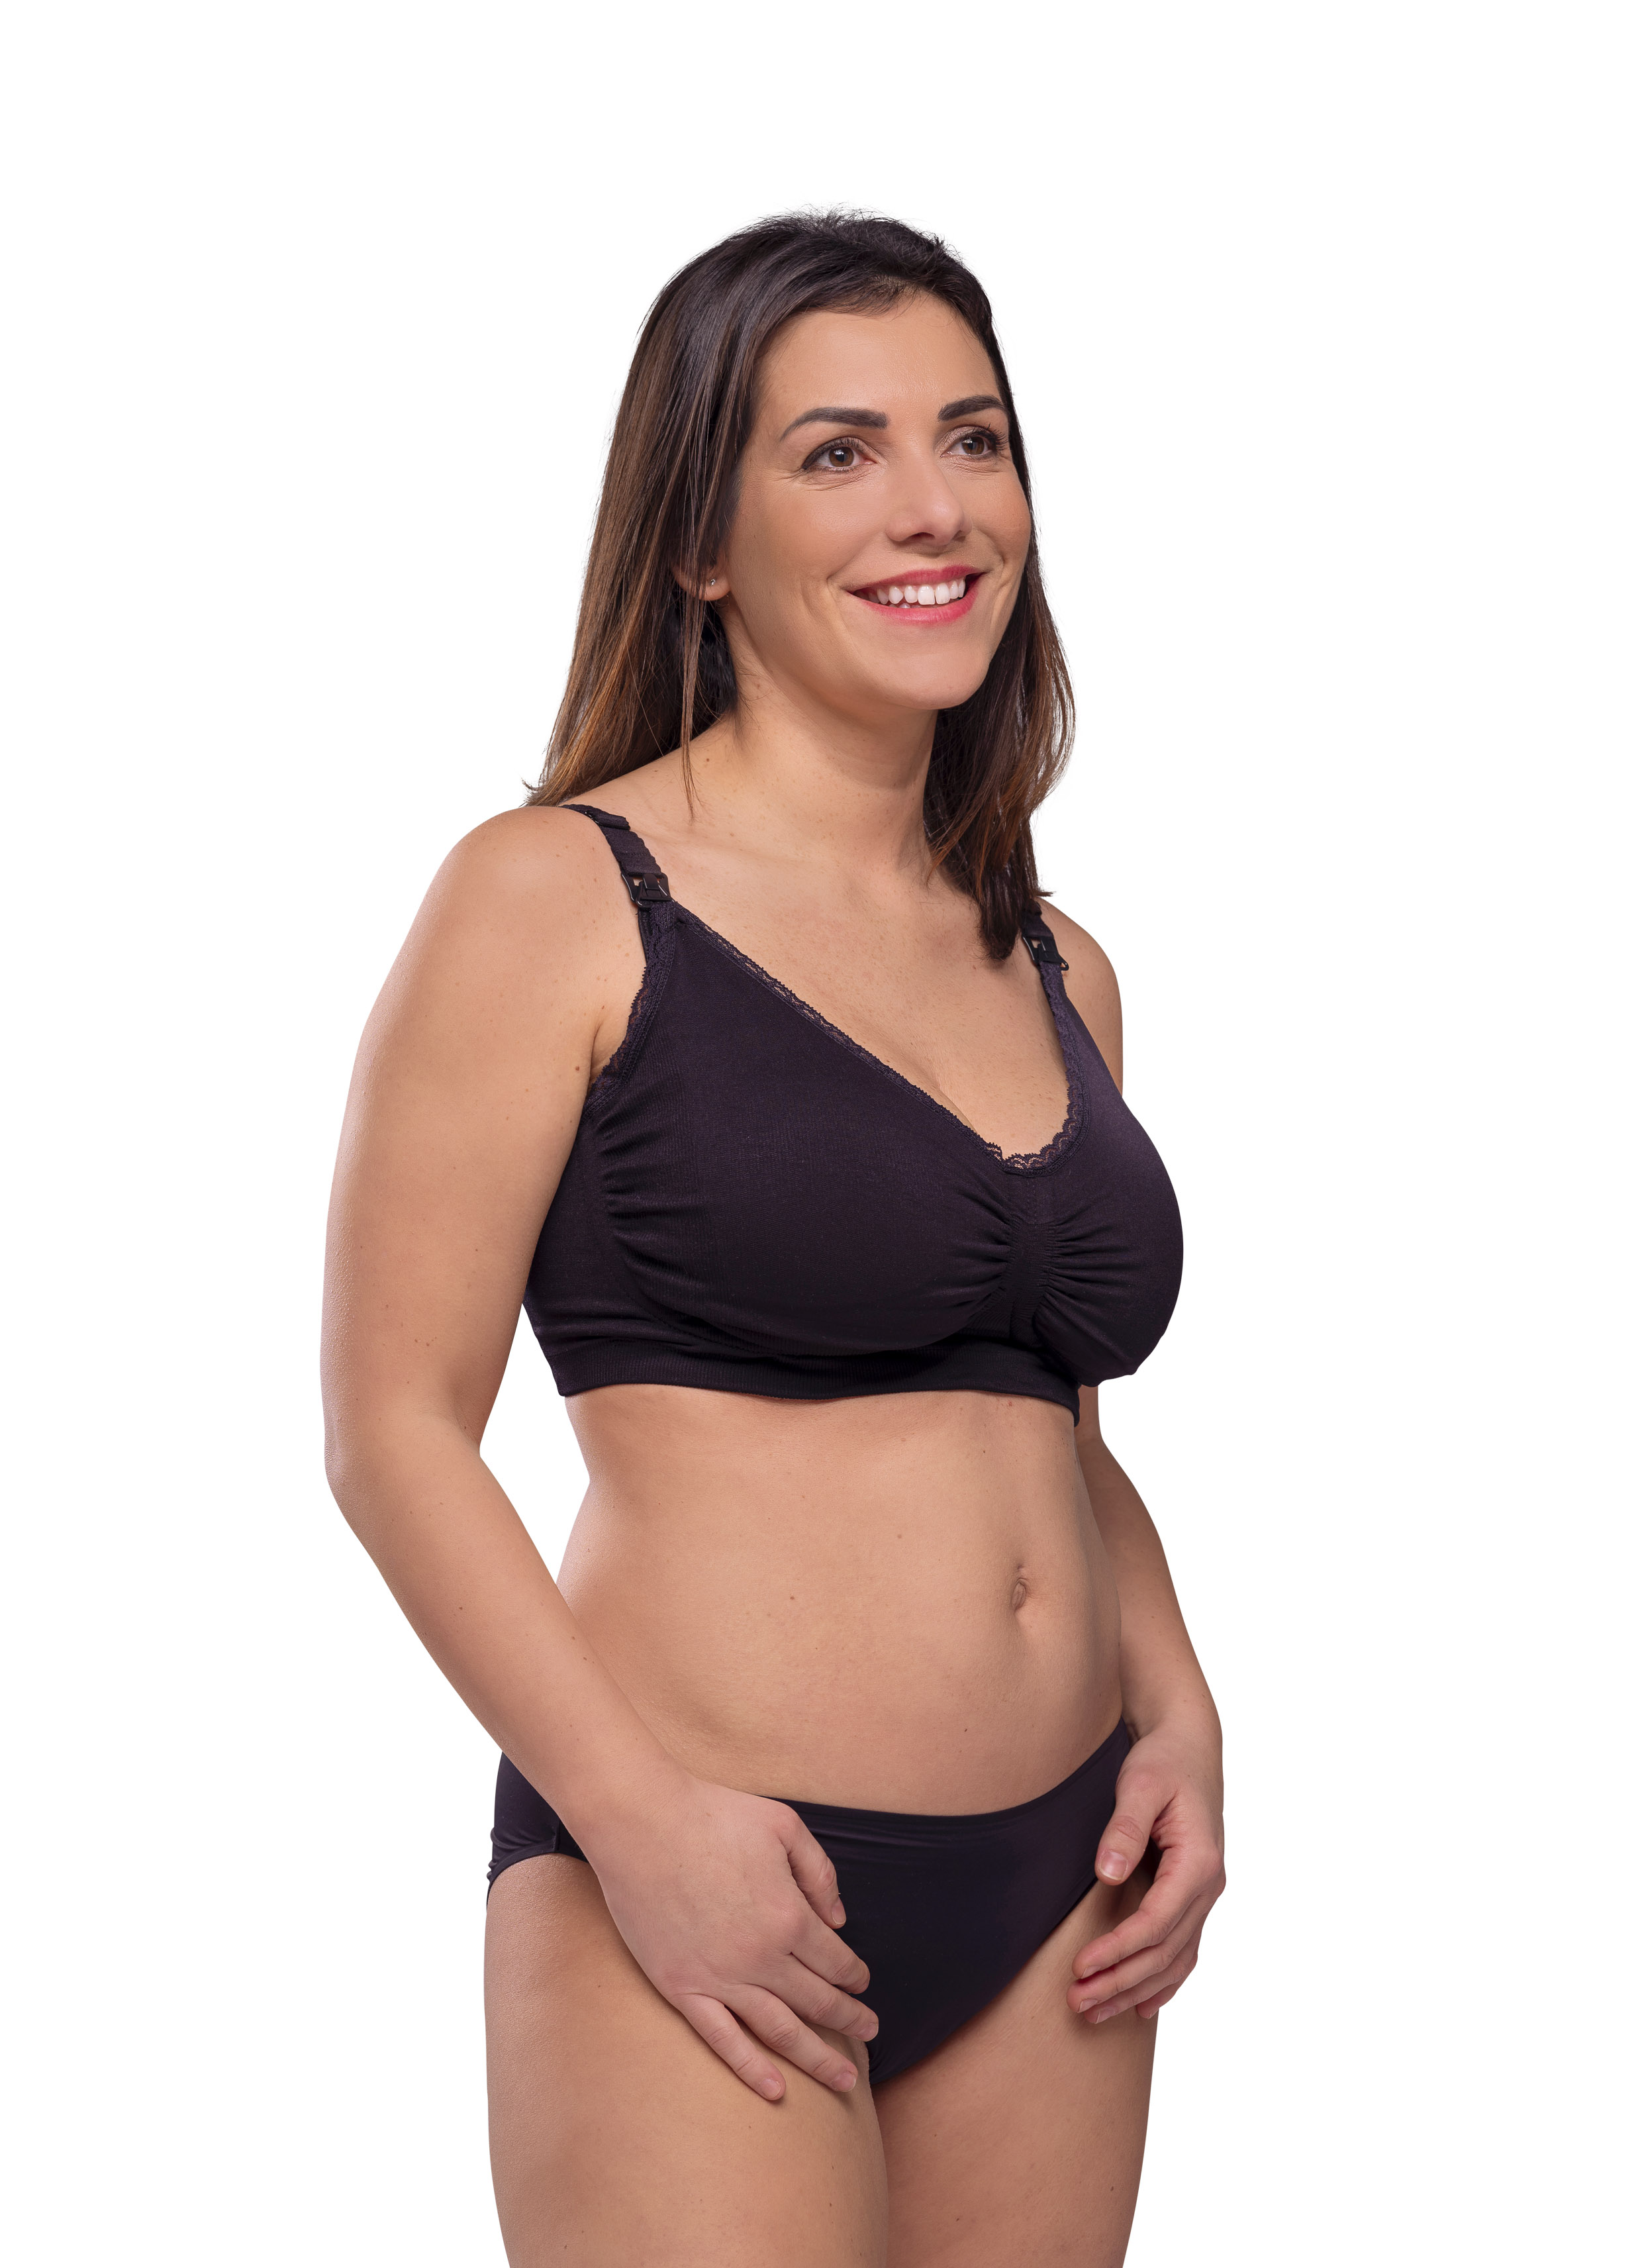 Carriwell Padded GelWire® Support Nursing Bra, White woman